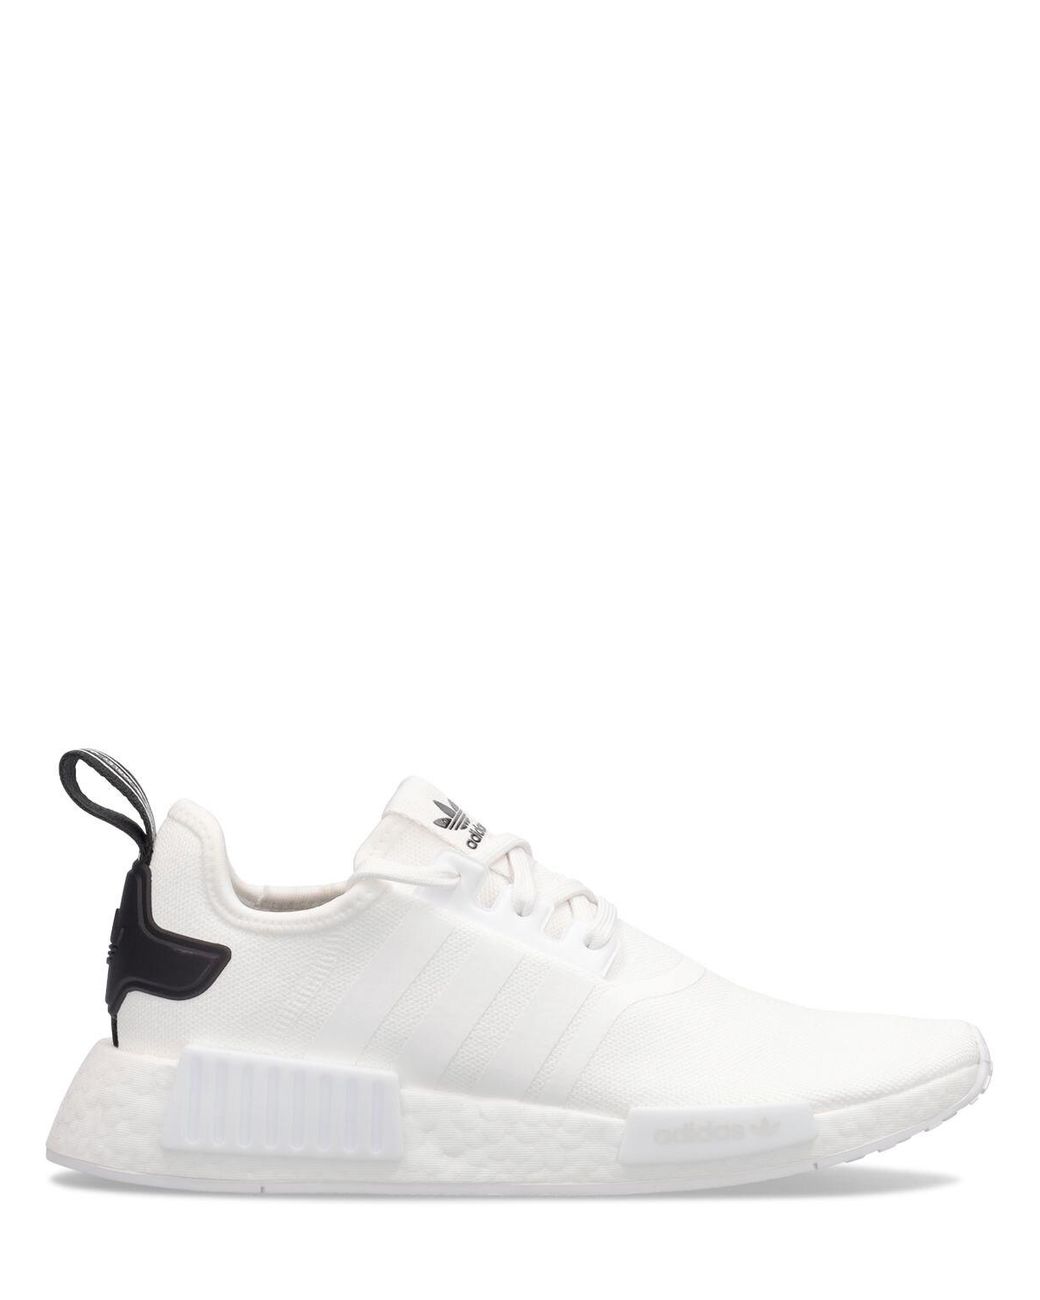 adidas Originals Nmd_r1 Parley Sneakers in White | Lyst Australia